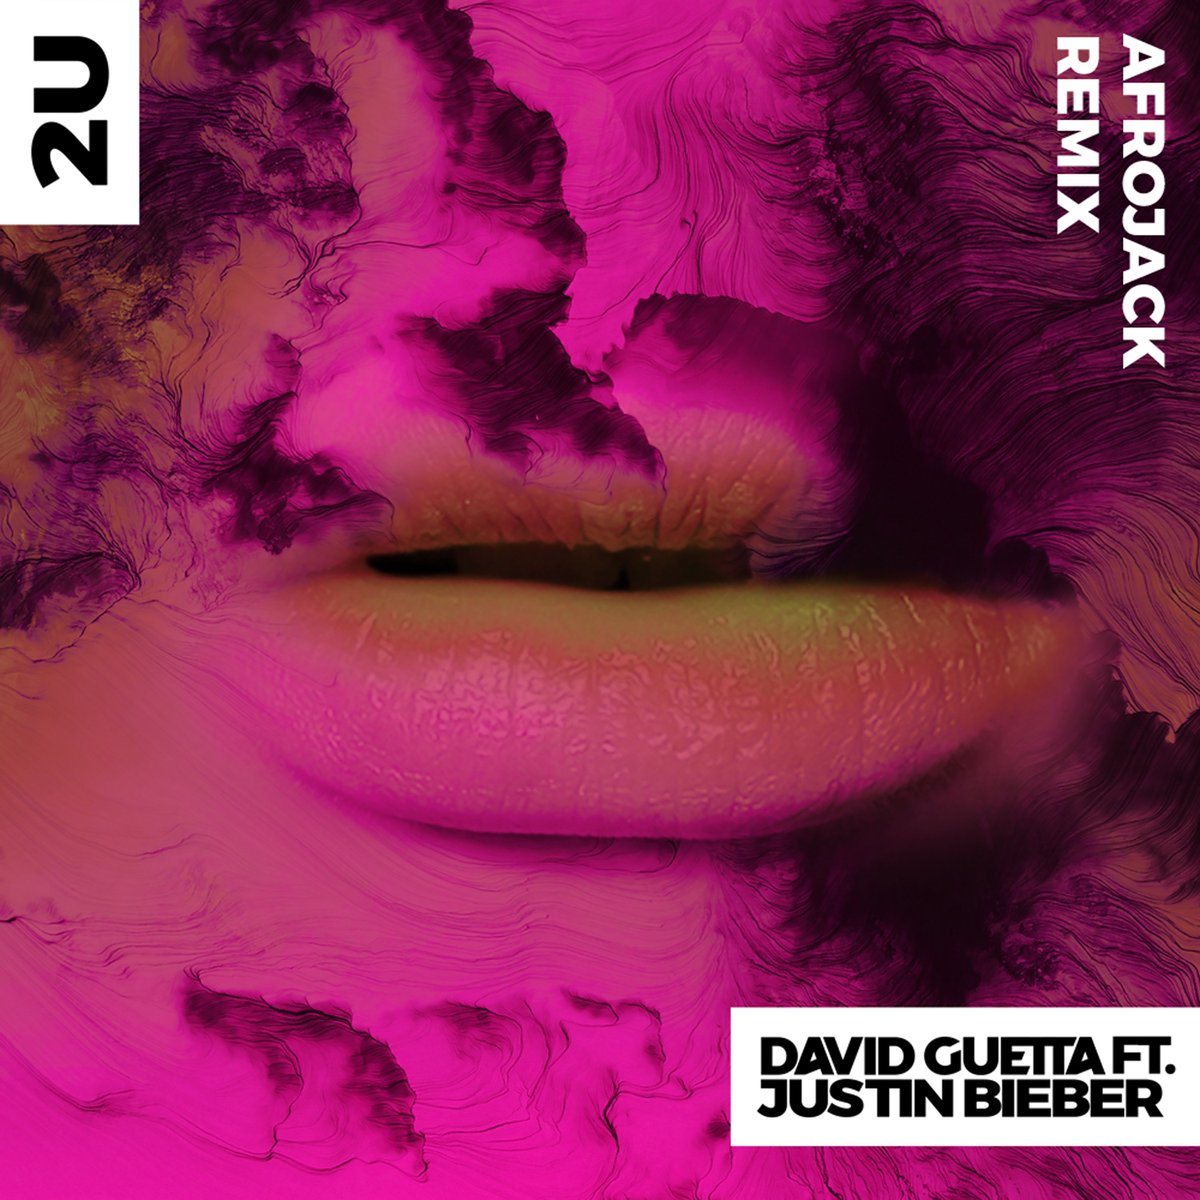 RT @afrojack: My remix of #2U by @davidguetta ft. @justinbieber is OUT NOW - https://t.co/DVkzrt1kIT https://t.co/92DNaW6WLn